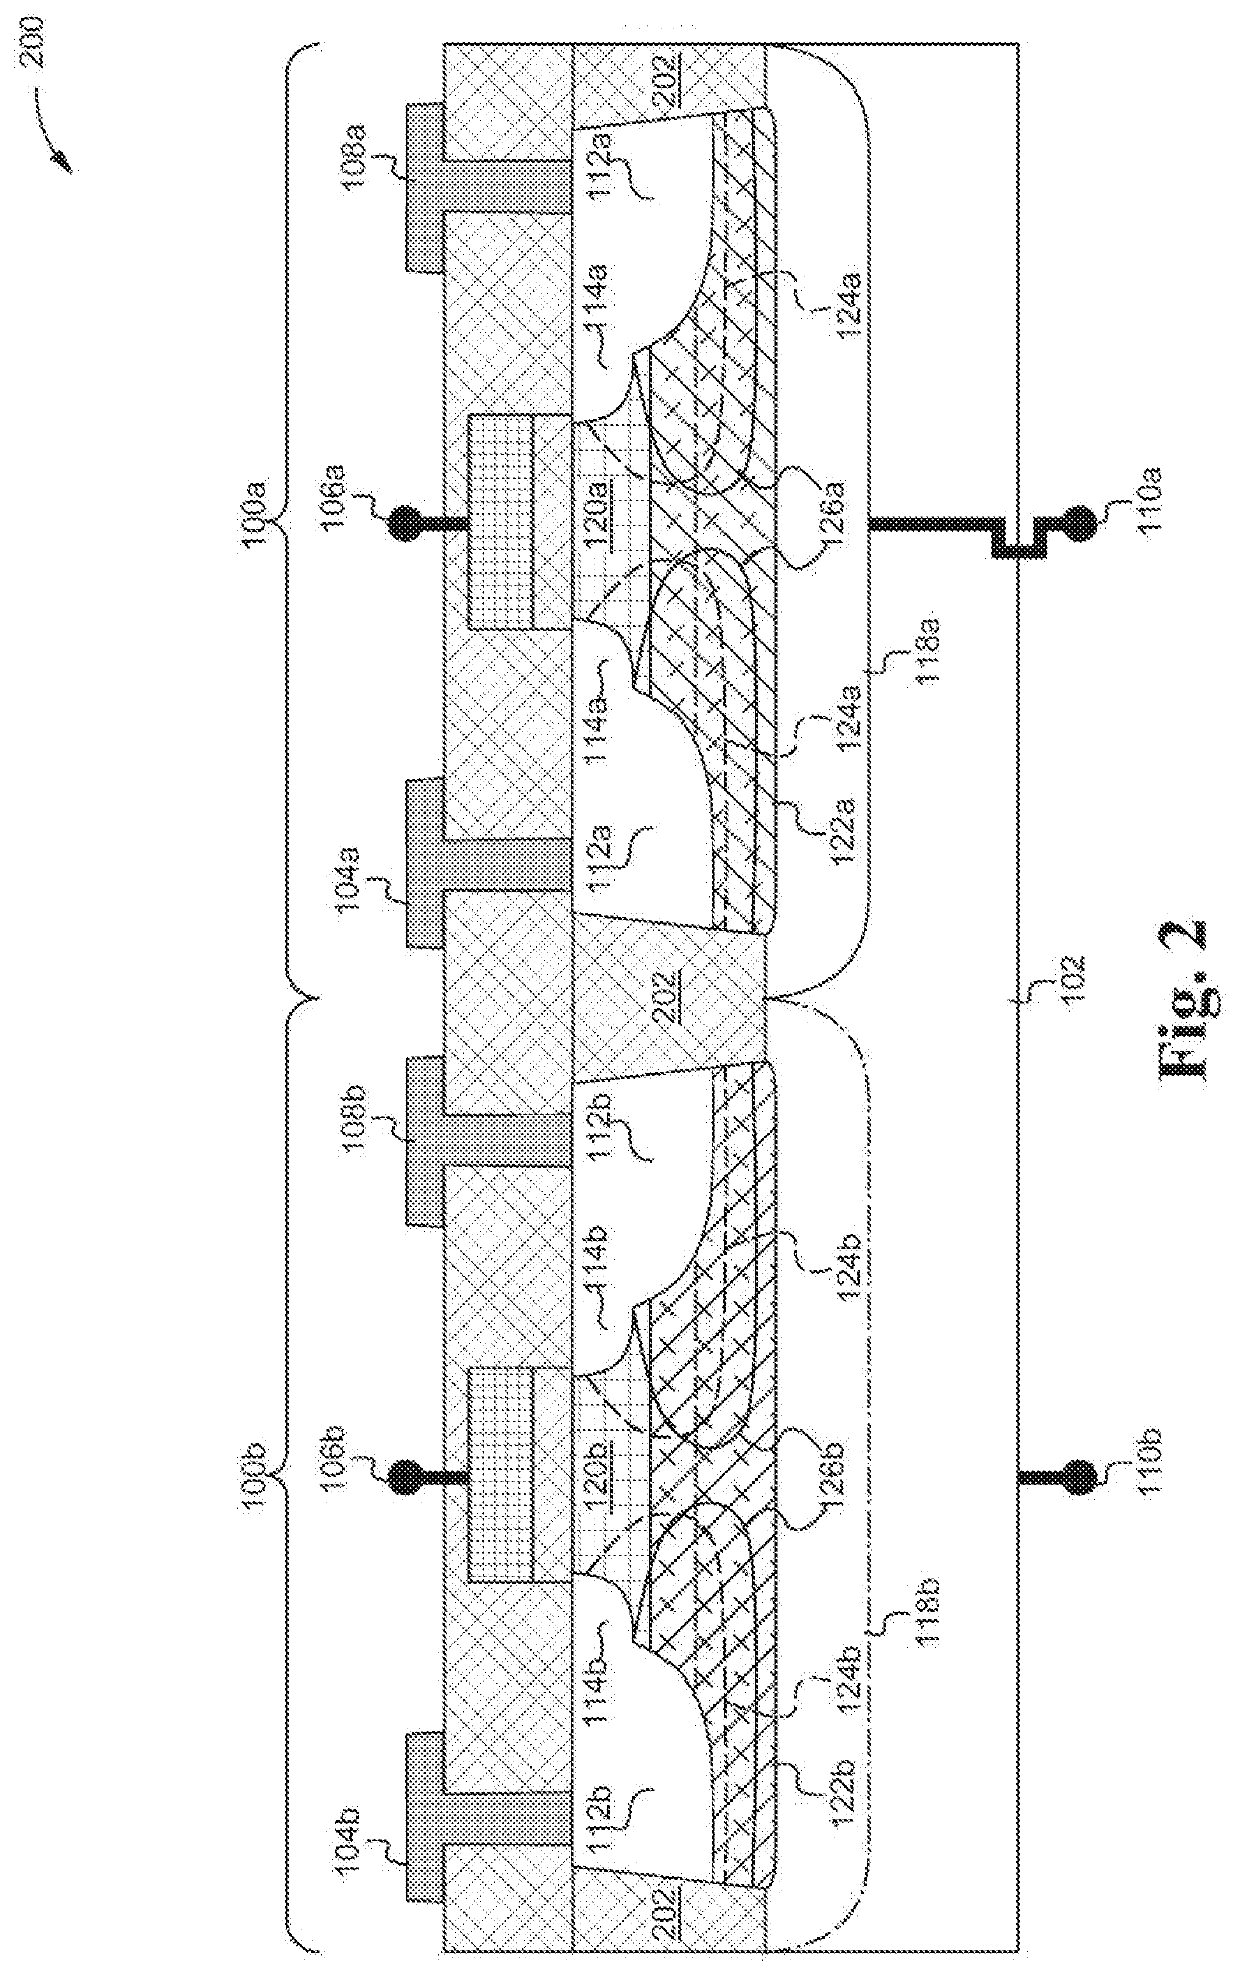 Transistor structure with multiple halo implants having epitaxial layer over semiconductor-on-insulator substrate